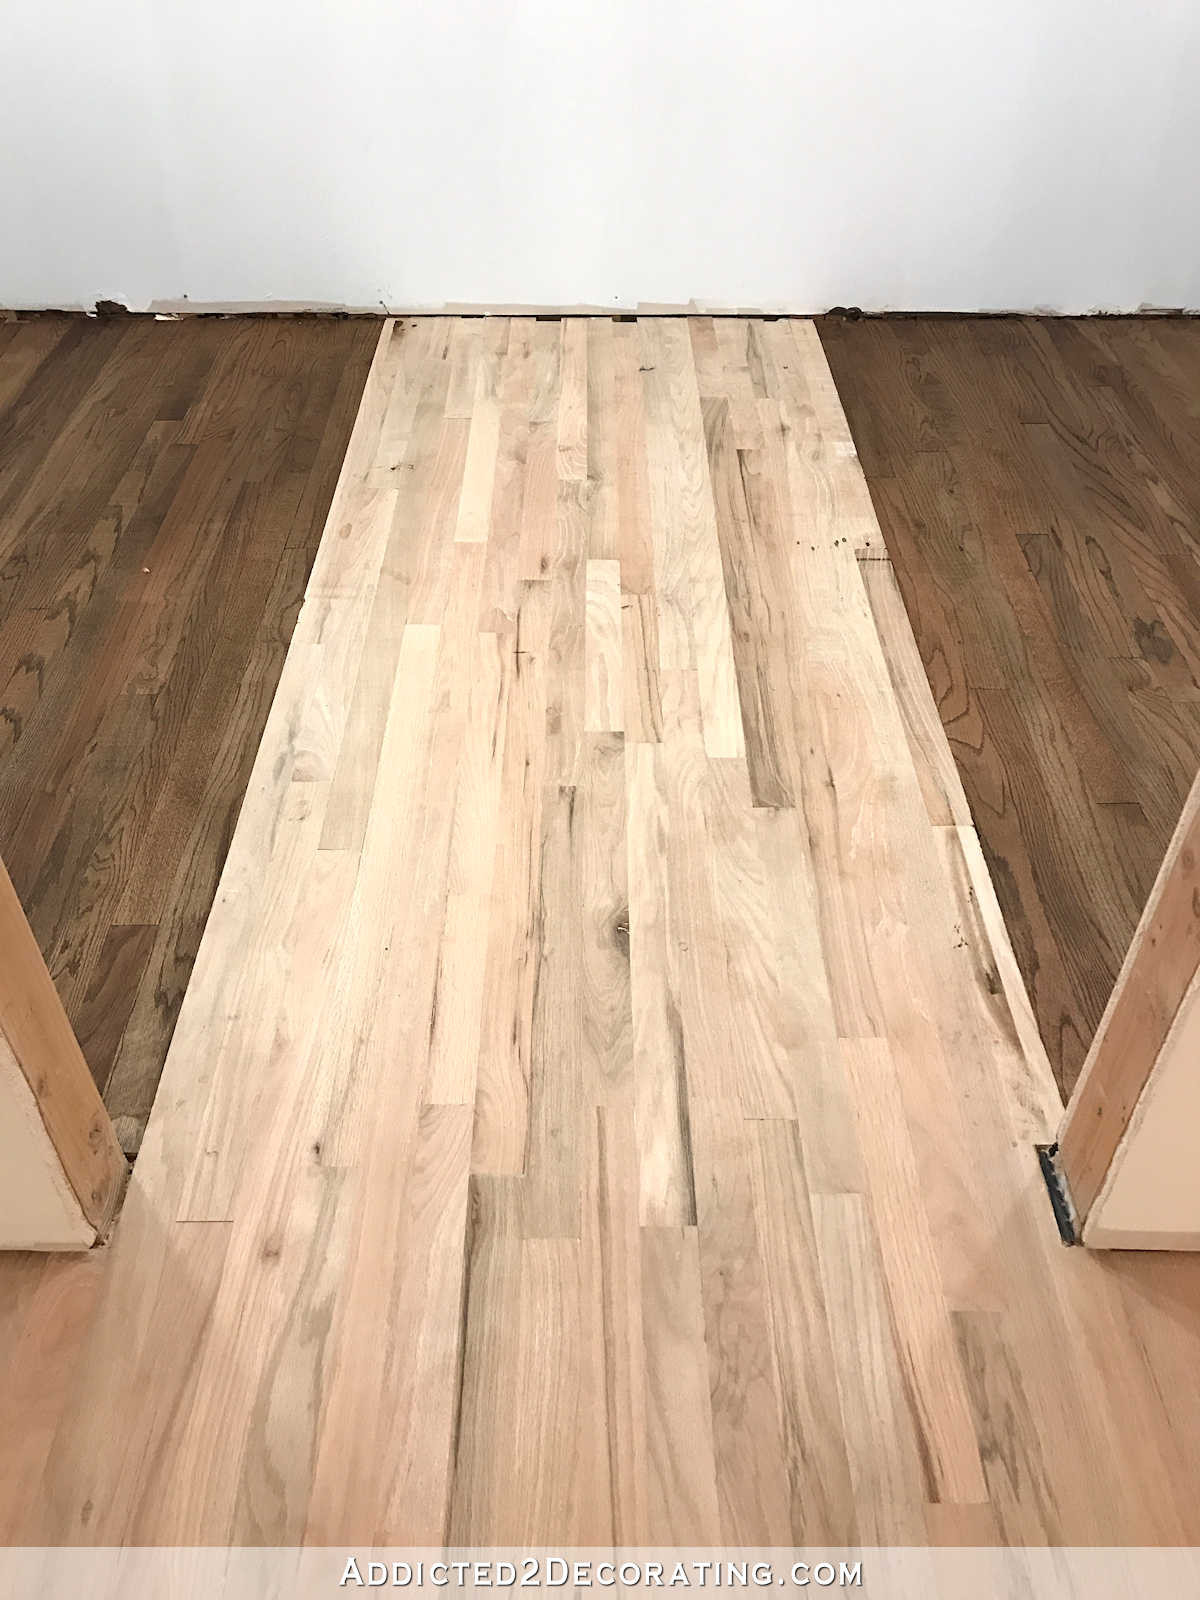 red oak hardwood flooring cost of adventures in staining my red oak hardwood floors products process with regard to staining red oak hardwood floors 11 stain on left and right sides of the